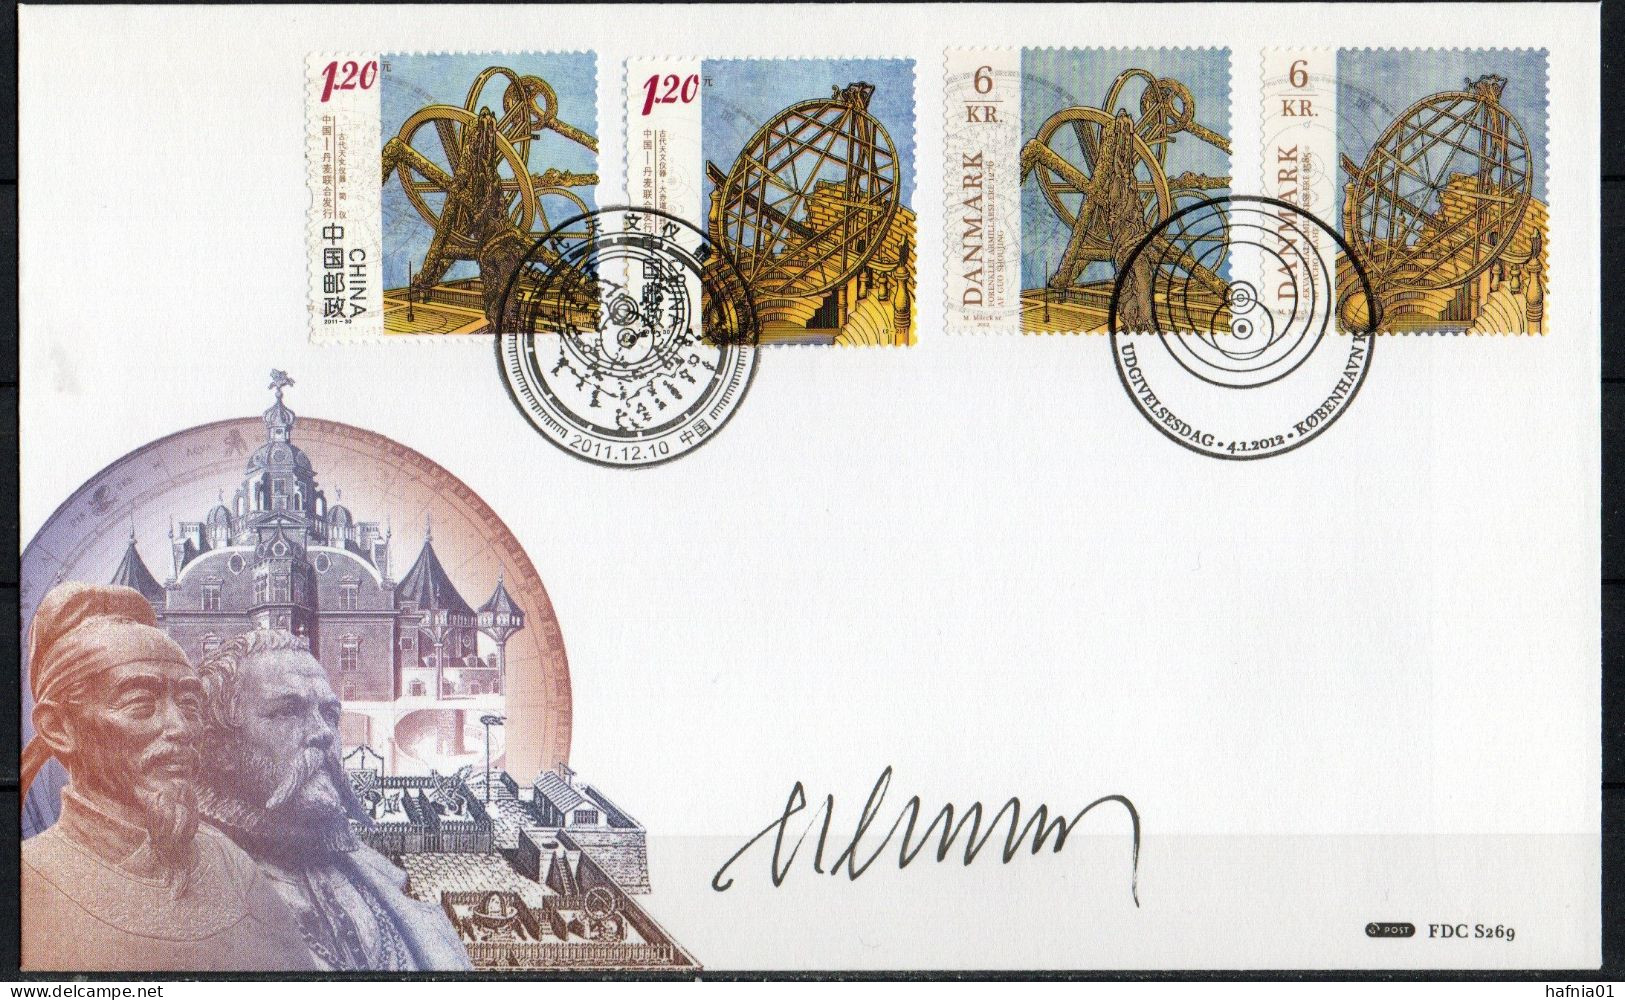 Martin Mörck. Denmark 2012. Astronomy. Joint Issue China-Denmark. Michel 1693 -1694+China. FDC. Signed. - FDC